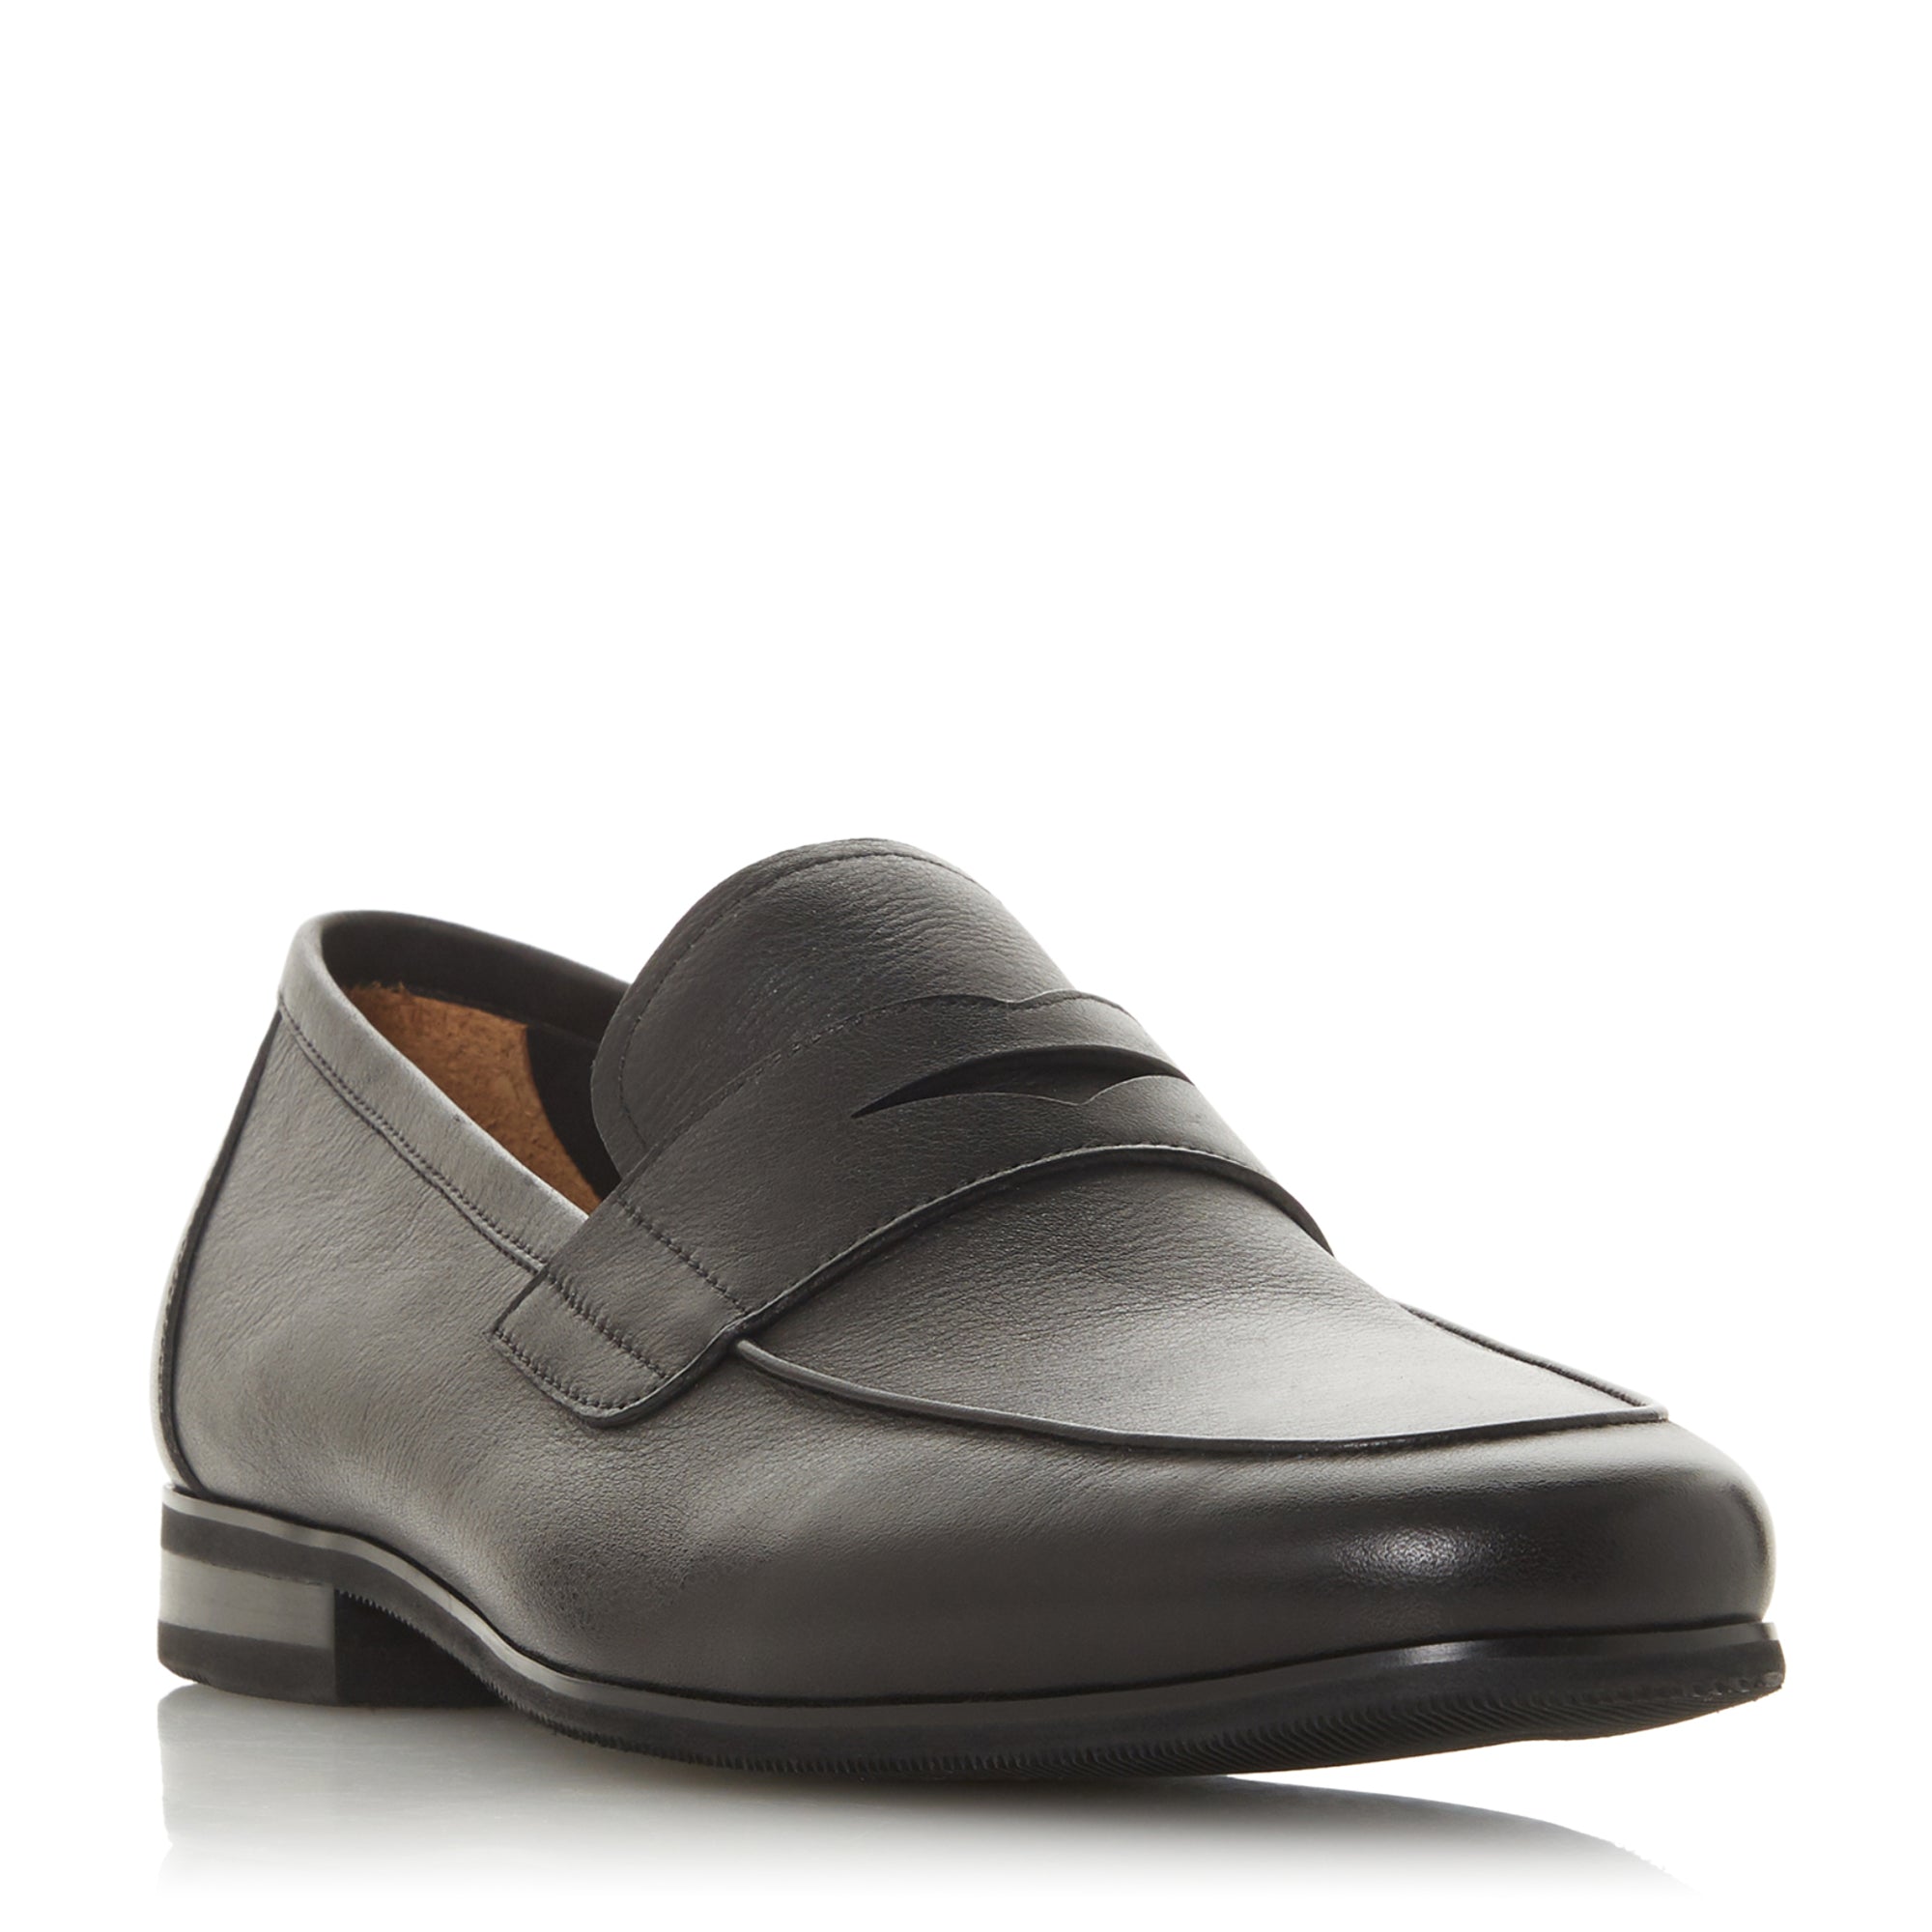 SULLY DI -  Striped Detail Loafer